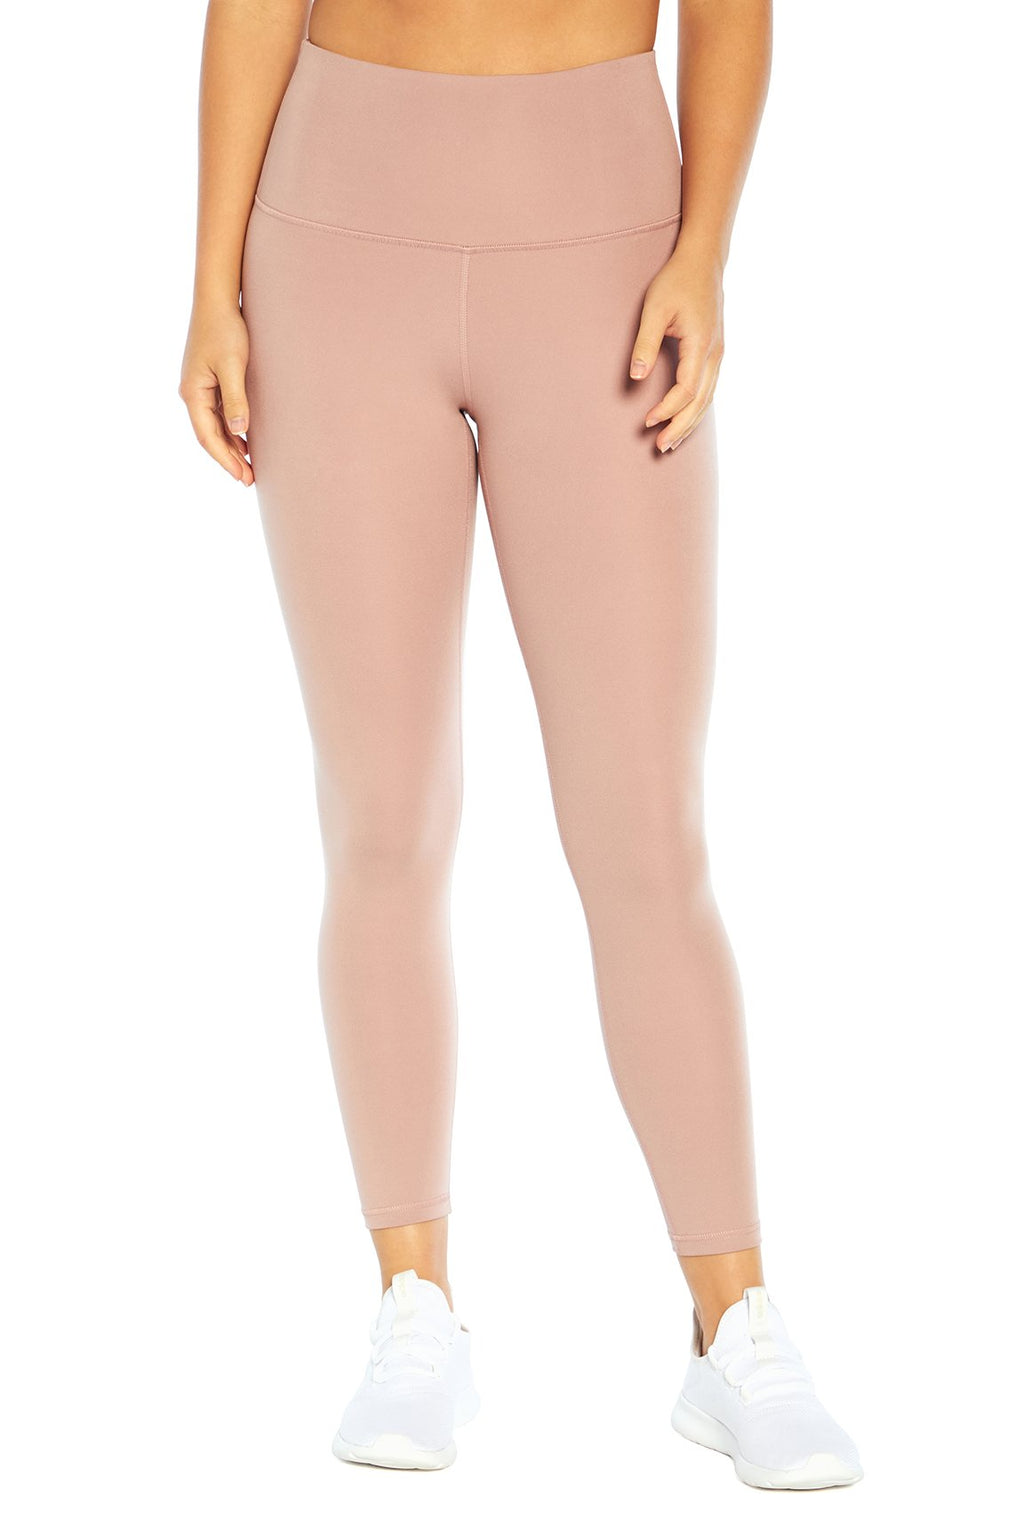 Z by Zobha, Pants & Jumpsuits, Z By Zobha Medium Raisin Ombre Shine High  Waisted Casual Athleisure Leggings